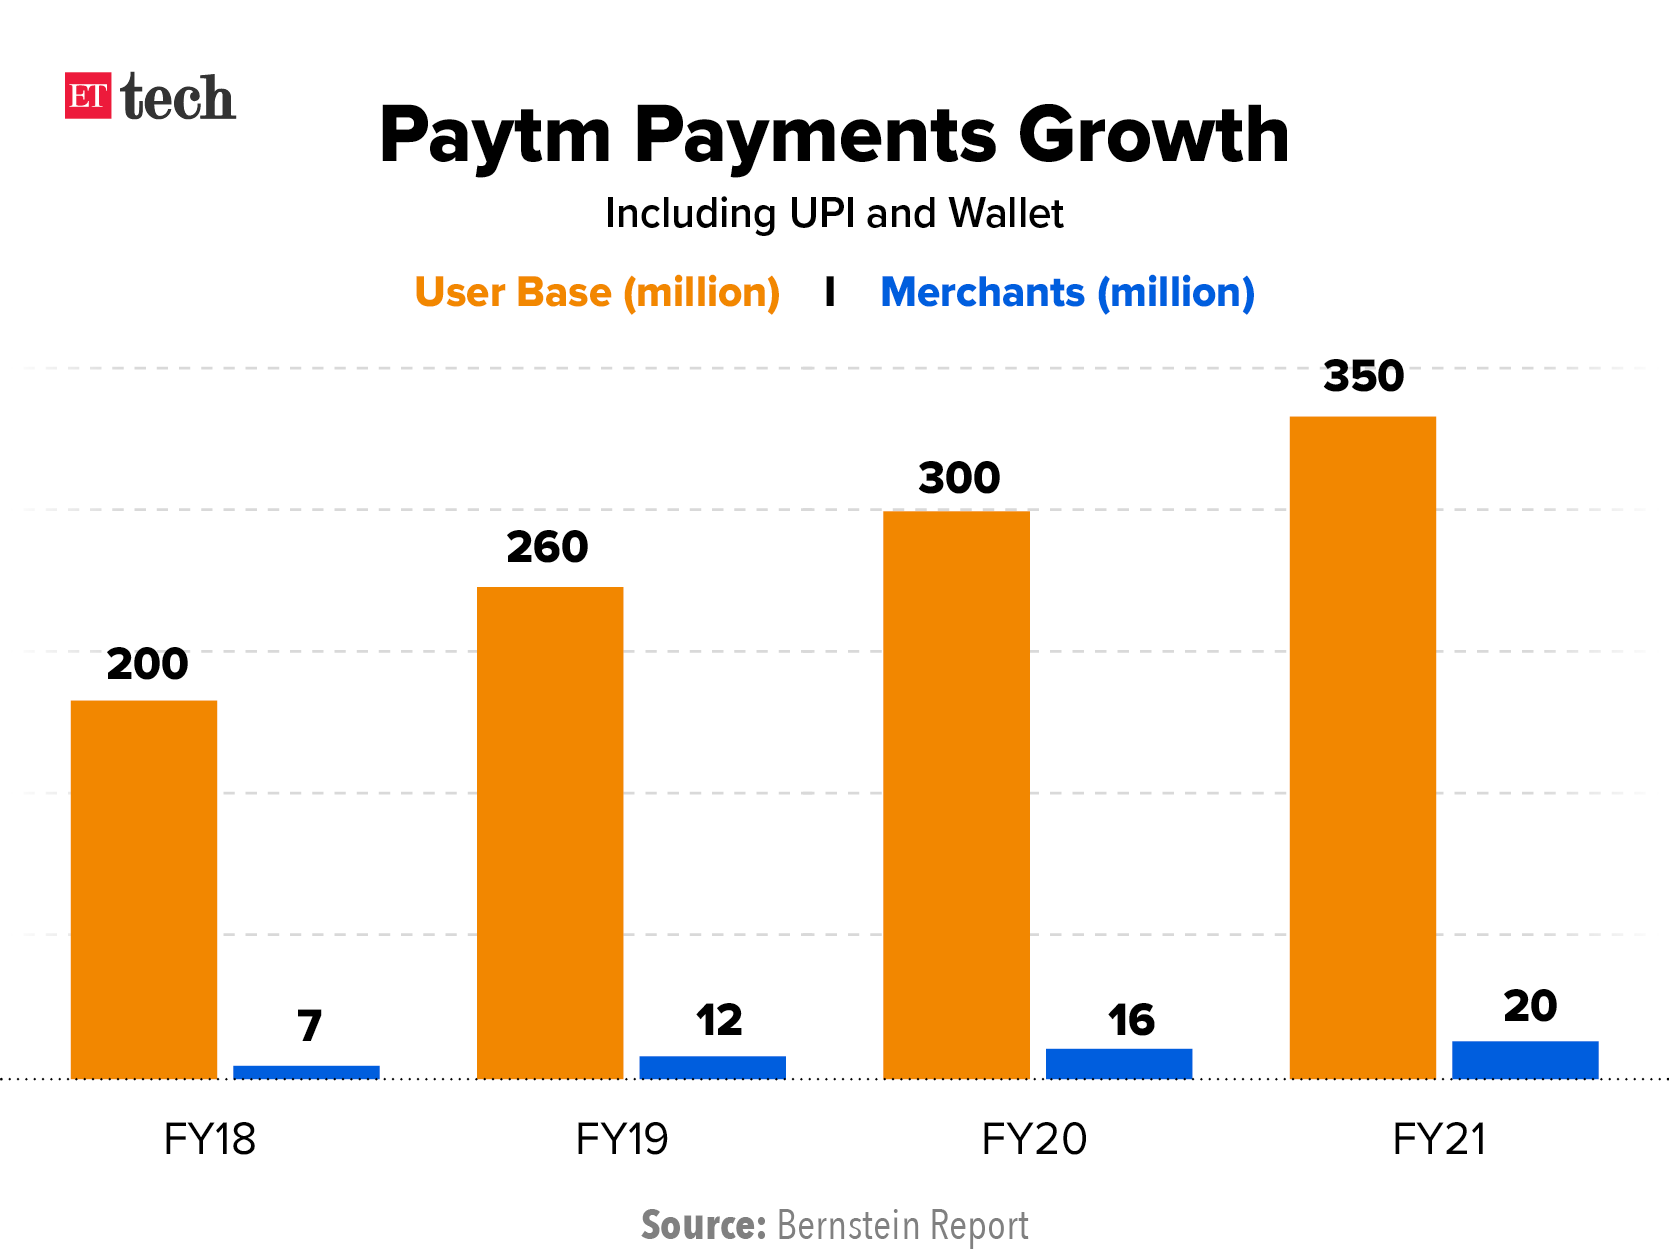 Paytm Payments Growth